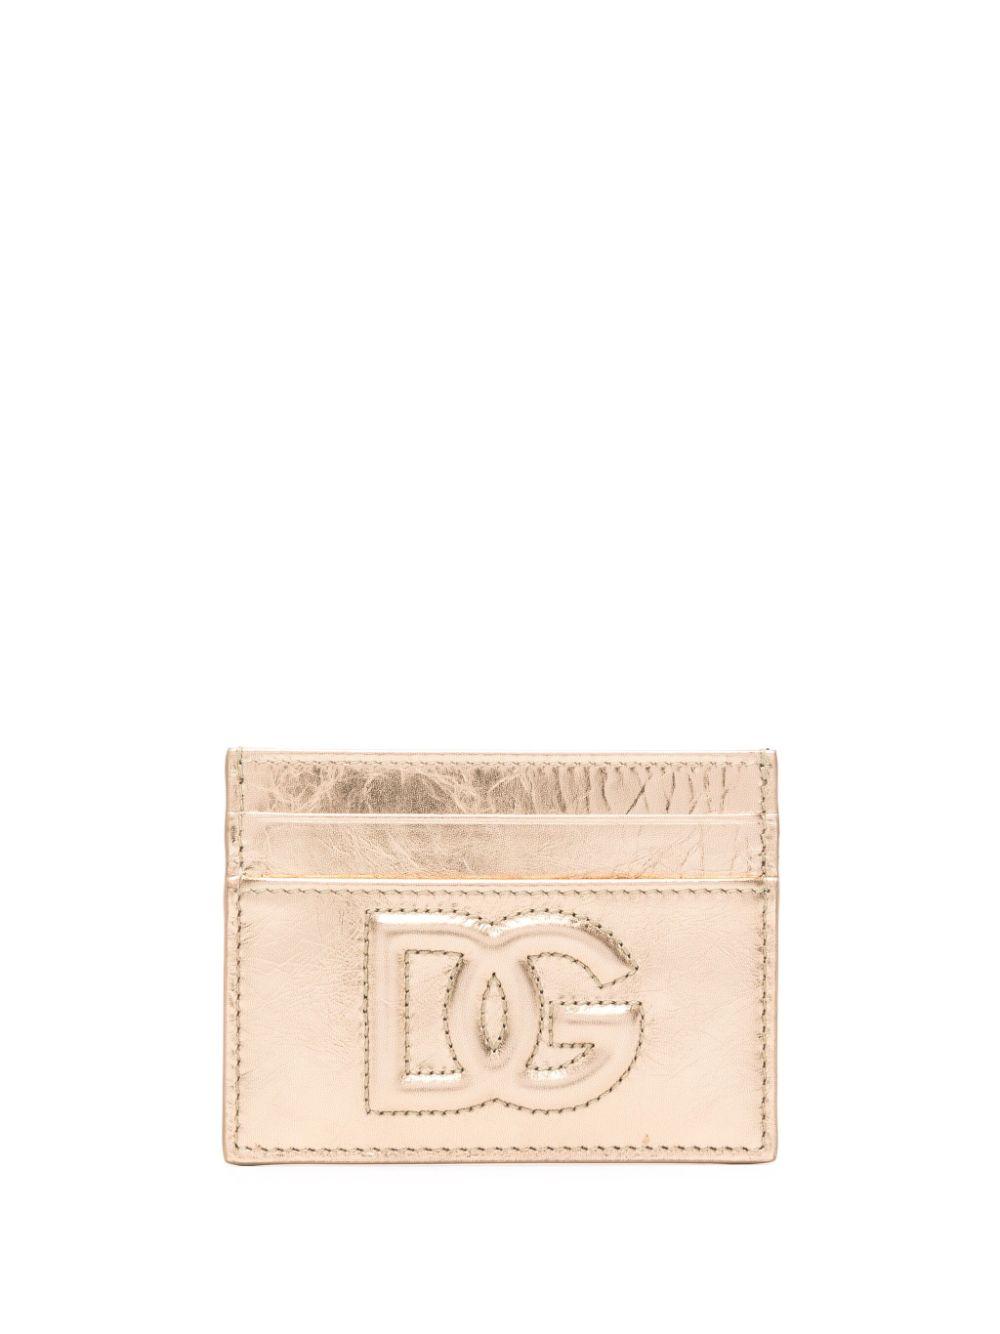 Dolce & Gabbana Logo Leather Credit Card Case in Natural | Lyst